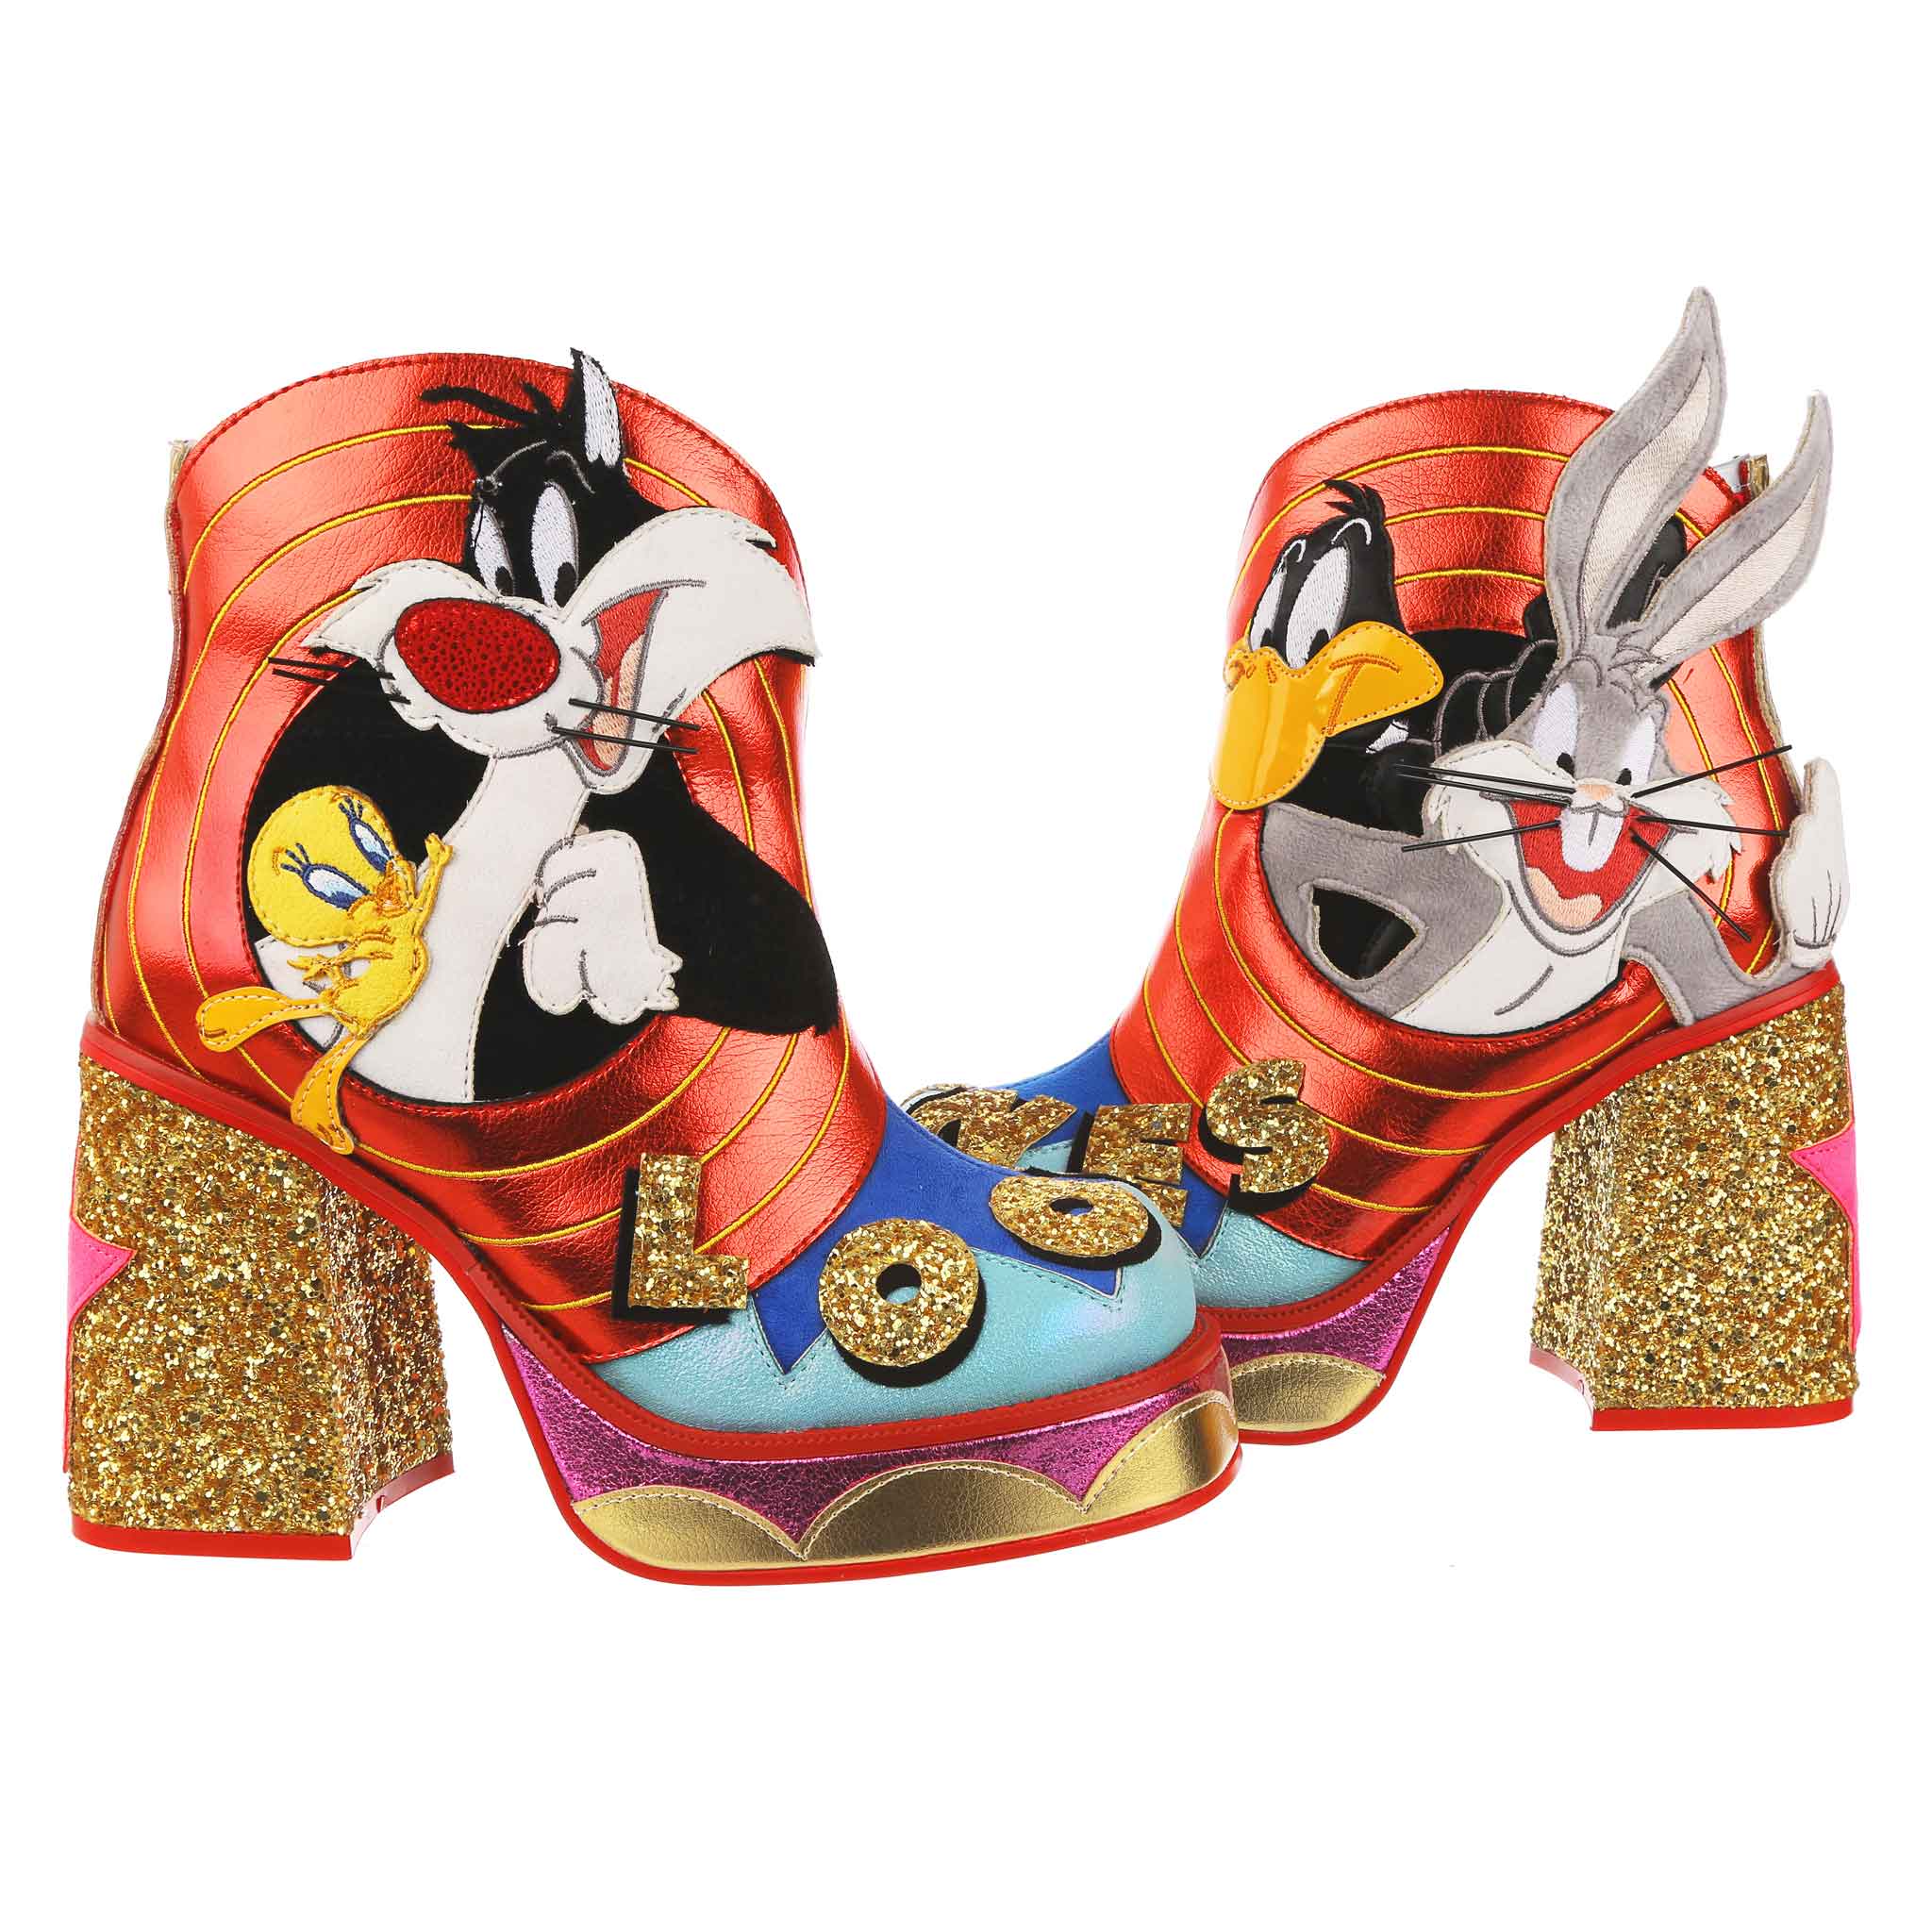 Retro style platform boots with a chunky gold glitter heel, has the red metallic circle from the famous Looney Tunes ending scene, the left foot has Daffy Duck of Bugs Bunny and the right foot has Sylvester the Cat and Tweety Bird. Finished with blue toes and gold glitter letters across the base spelling Looney Tunes.